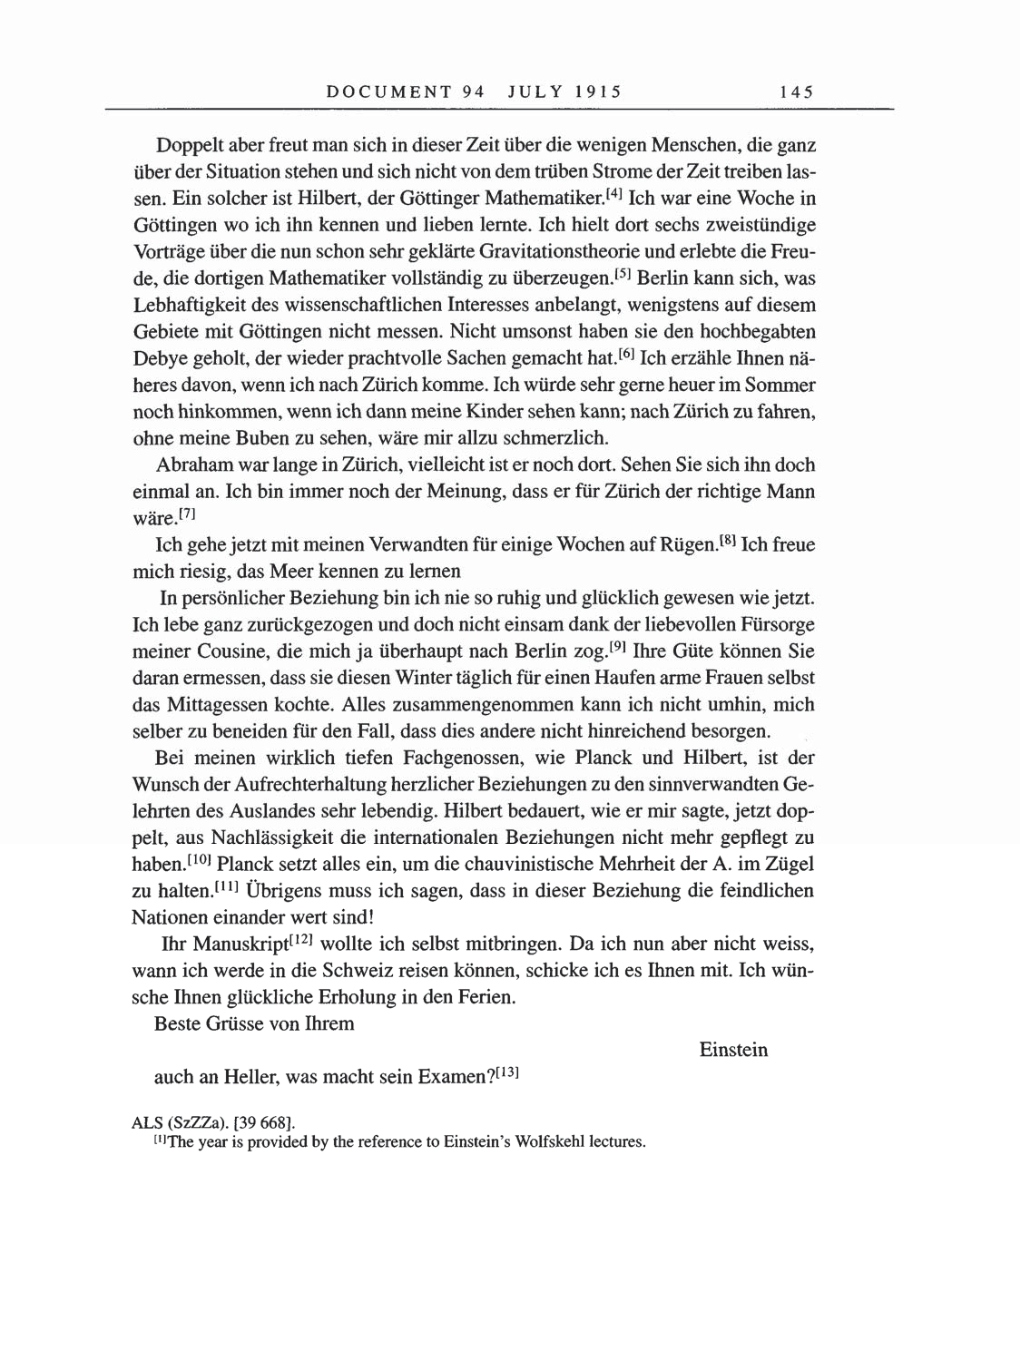 Volume 8, Part A: The Berlin Years: Correspondence 1914-1917 page 145